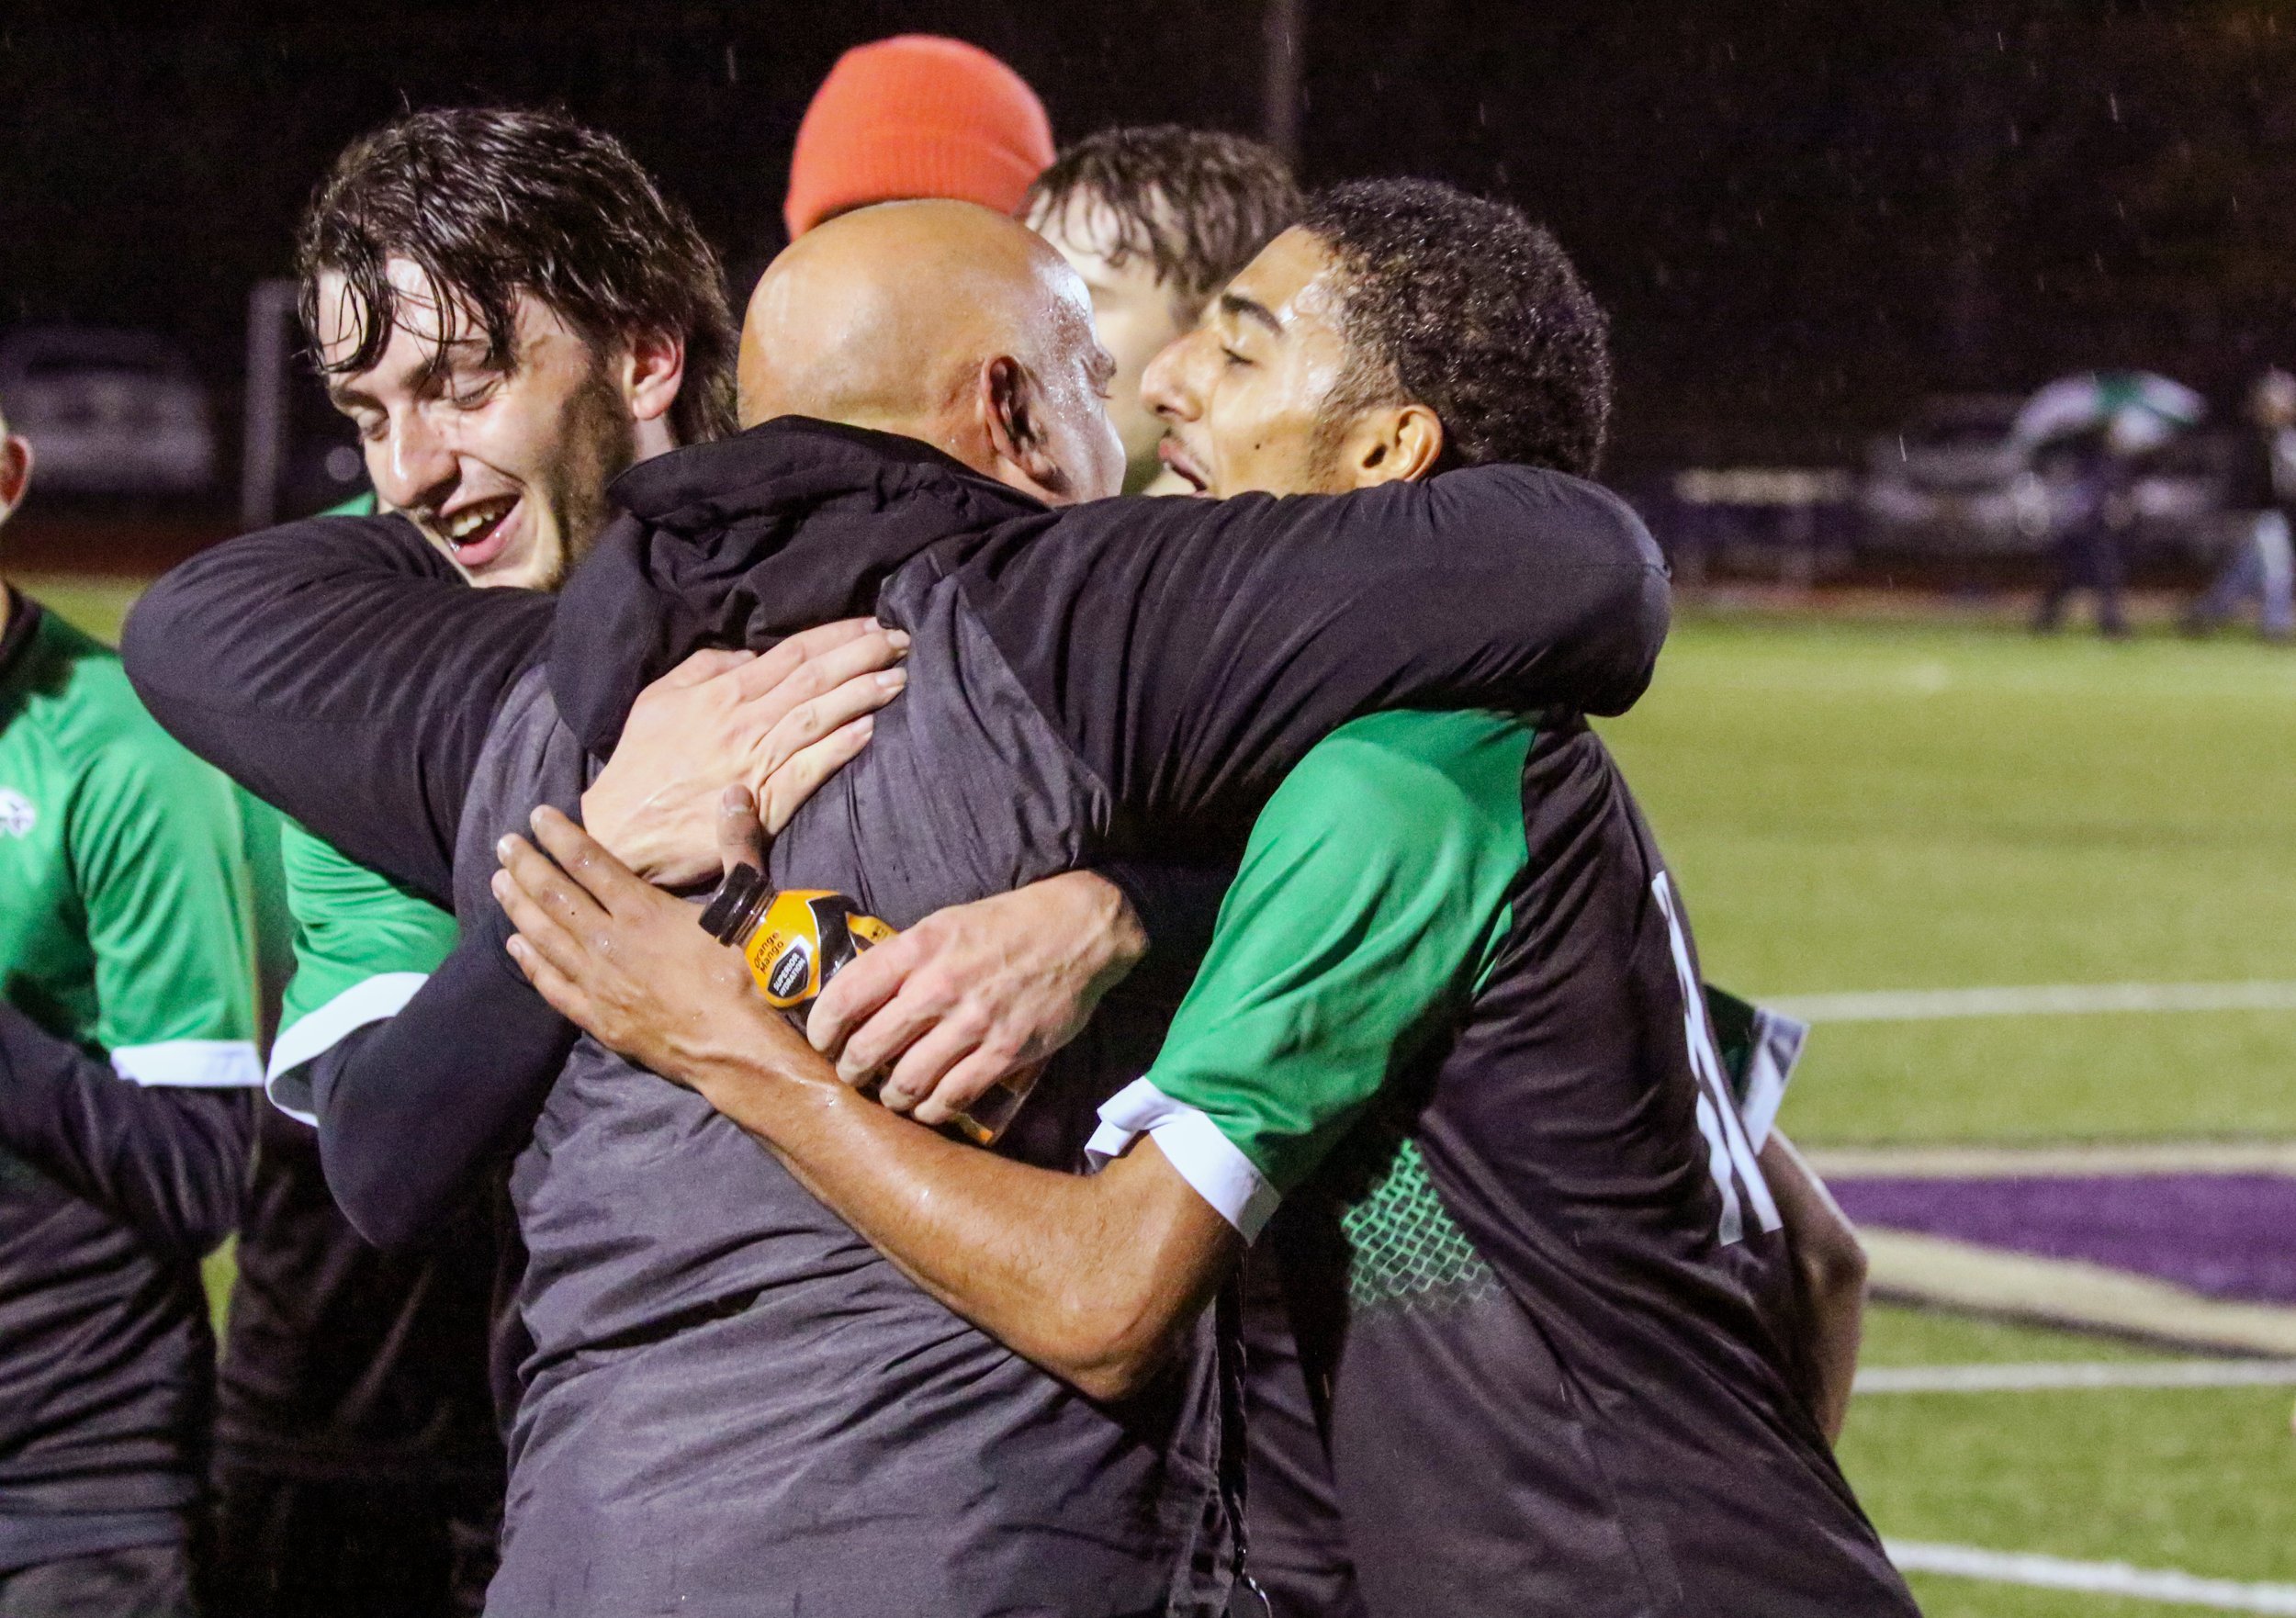  In this file photo, Fillmore head coach Jamie Mullen shares an embrace with both seniors Graham Cahill, left, and Deen Muzaid-Omar, right, after winning the Section V, Class D1 Championship back in October. Mullen’s Hall of Fame career with Fillmore